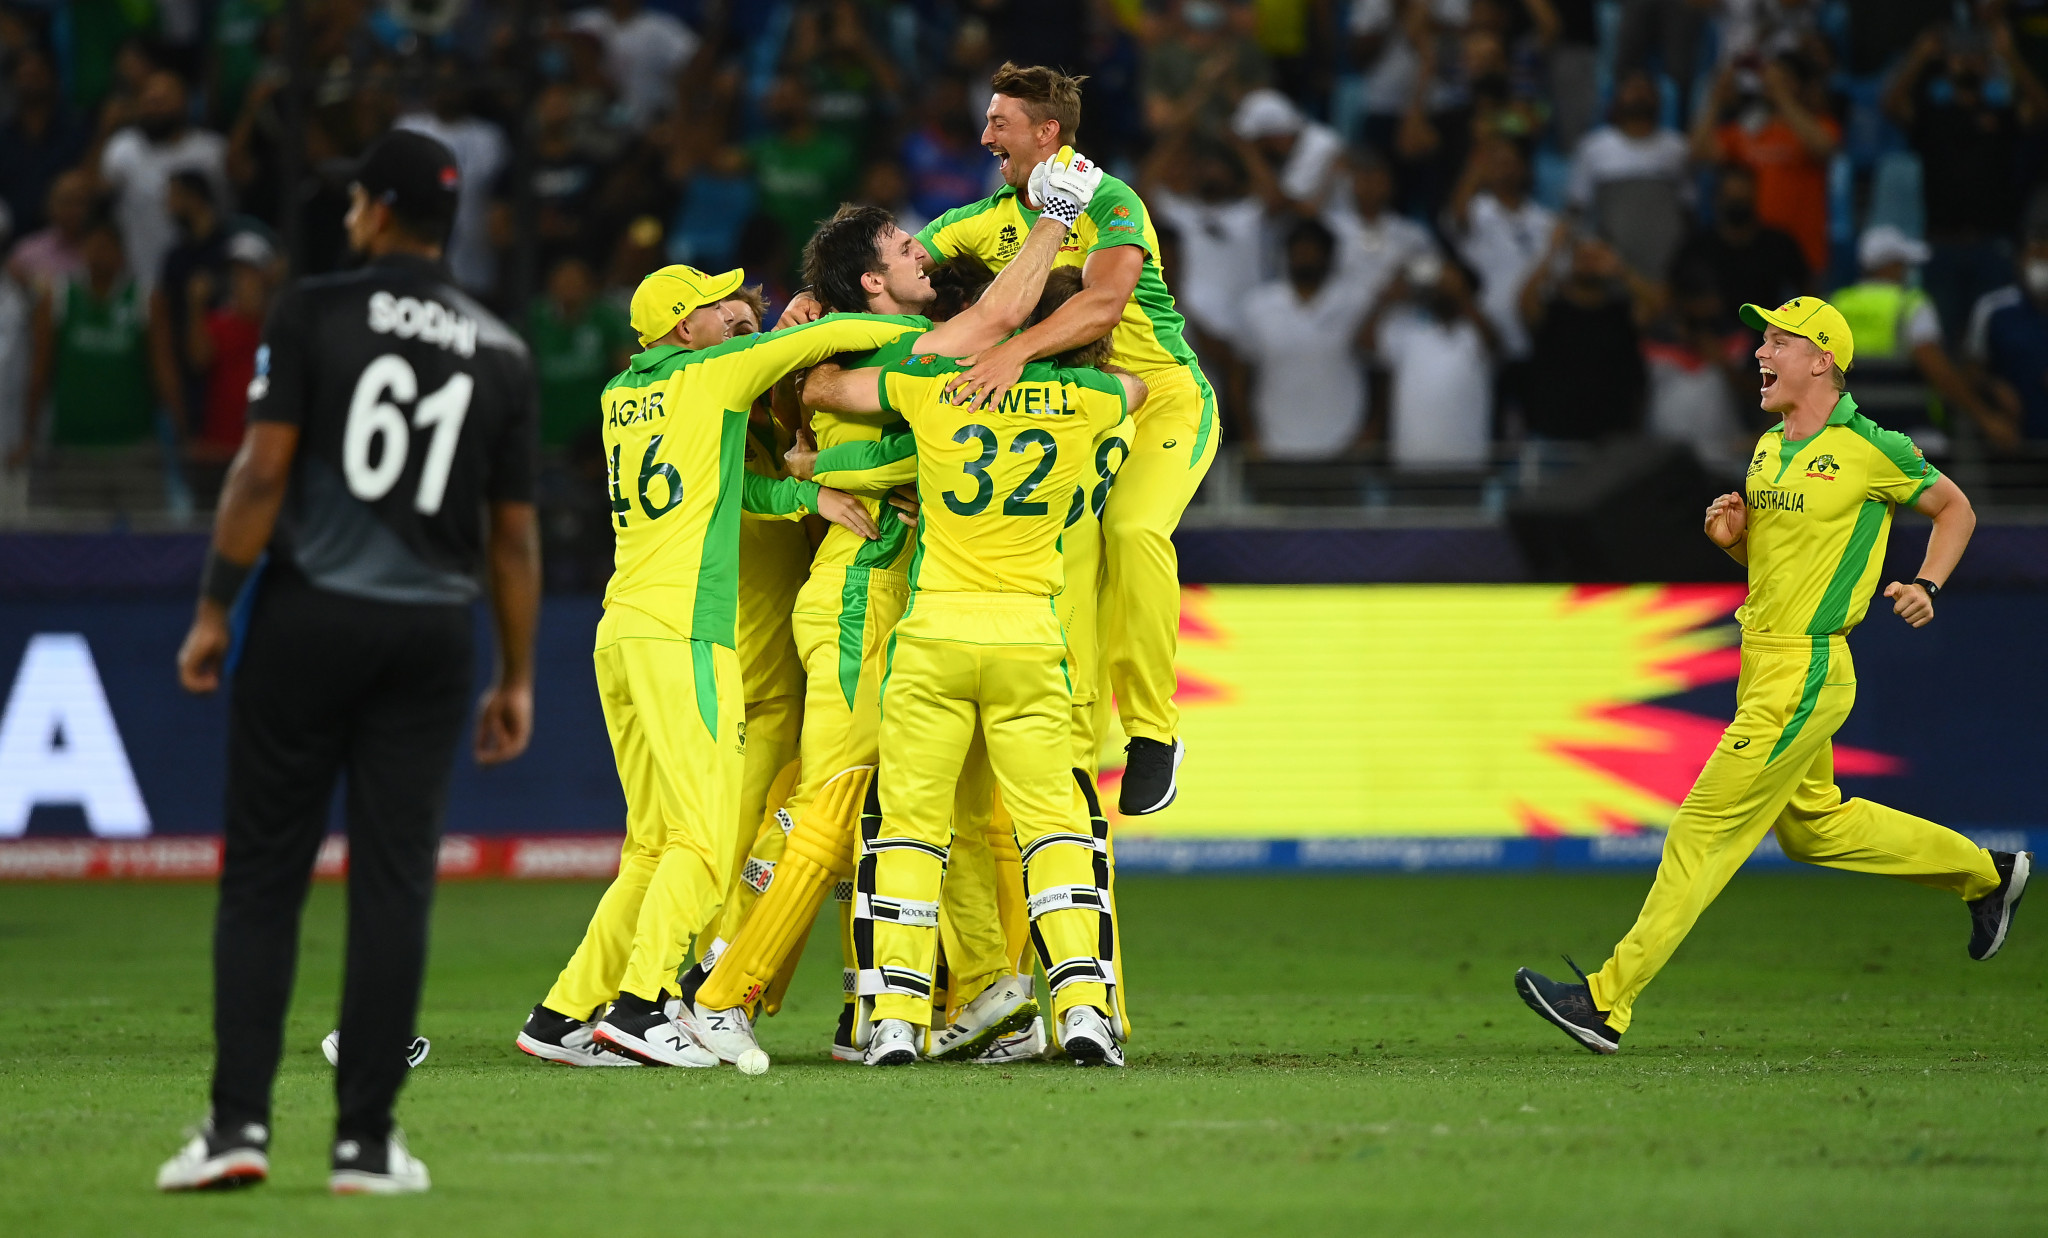 Australia defeated New Zealand in the Men's T20 World Cup final ©Getty Images